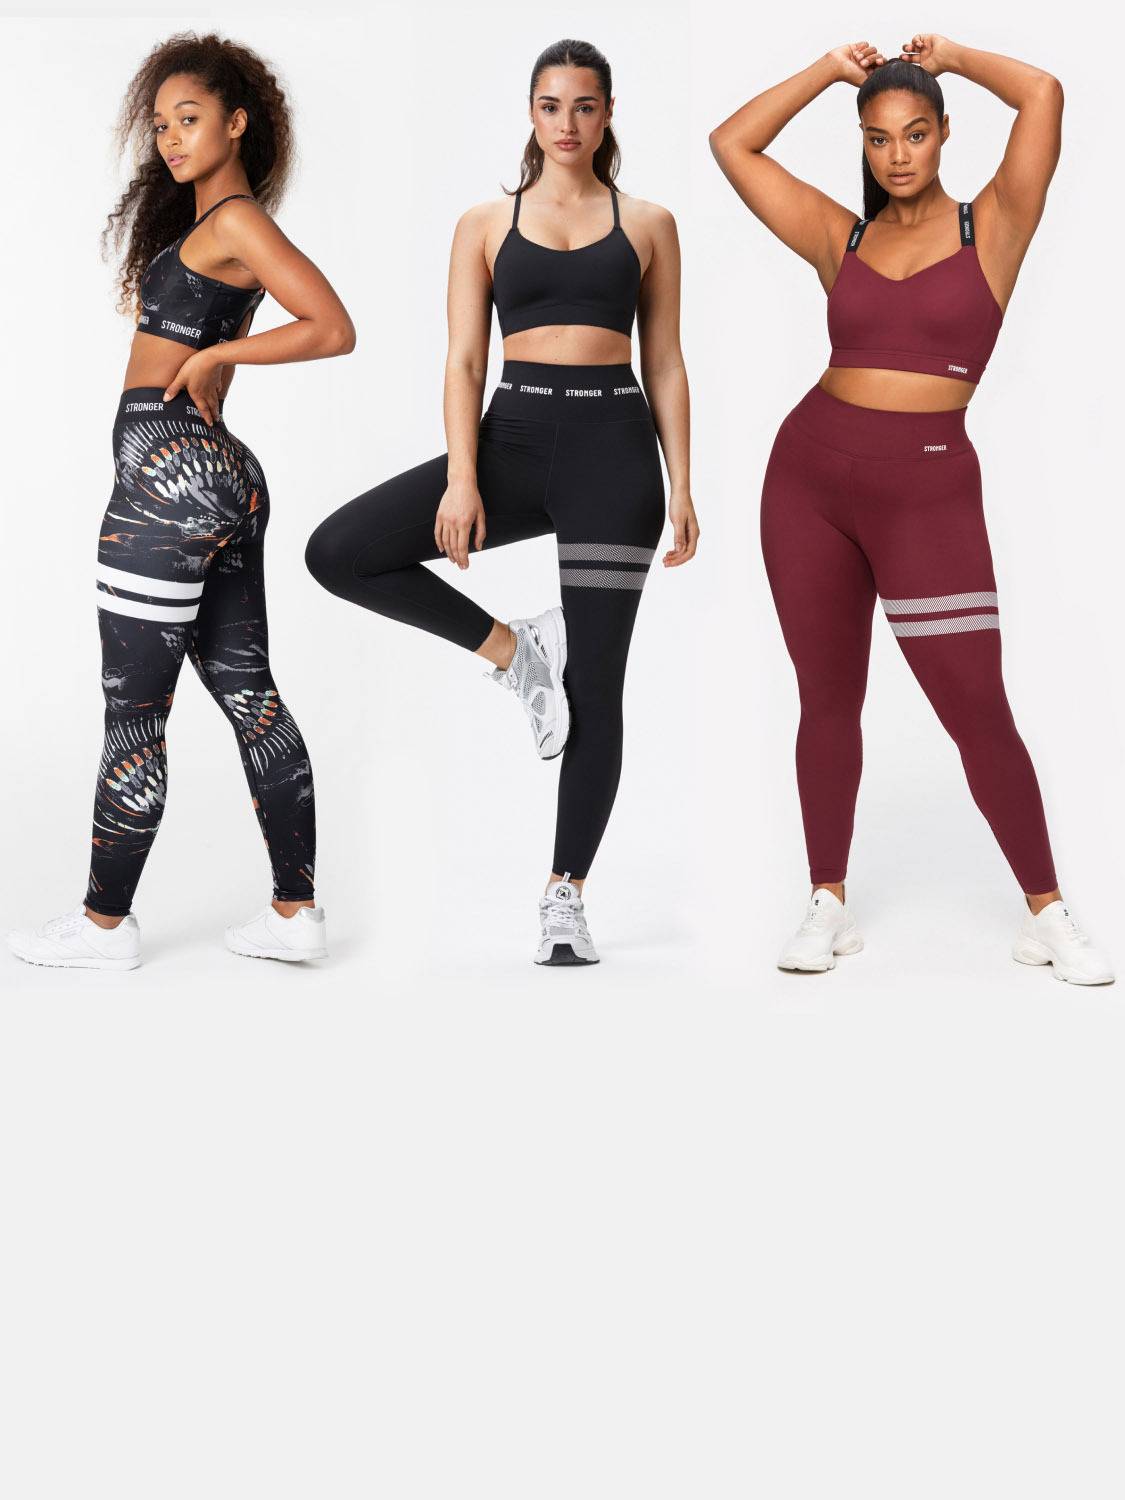 Empower Your Fitness: Women's Activewear for Active Lifestyles